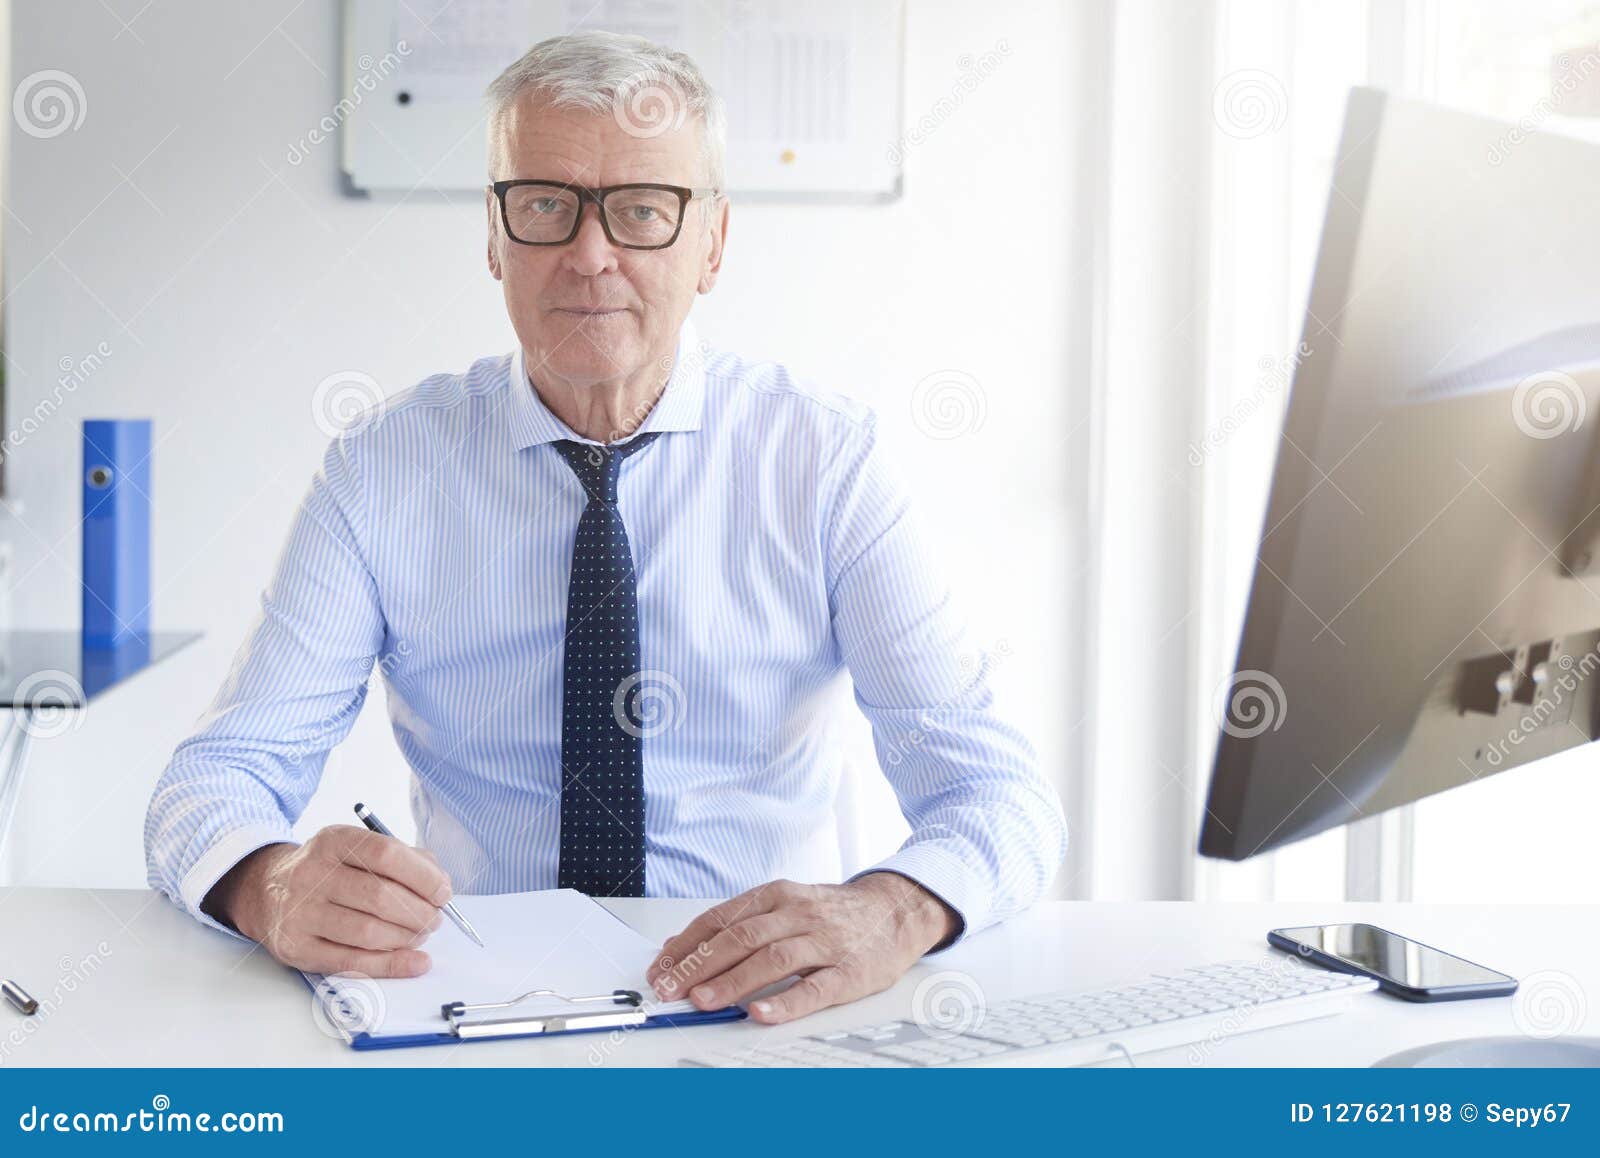 Businessman Sitting At Office Desk And Making Notes Stock Photo